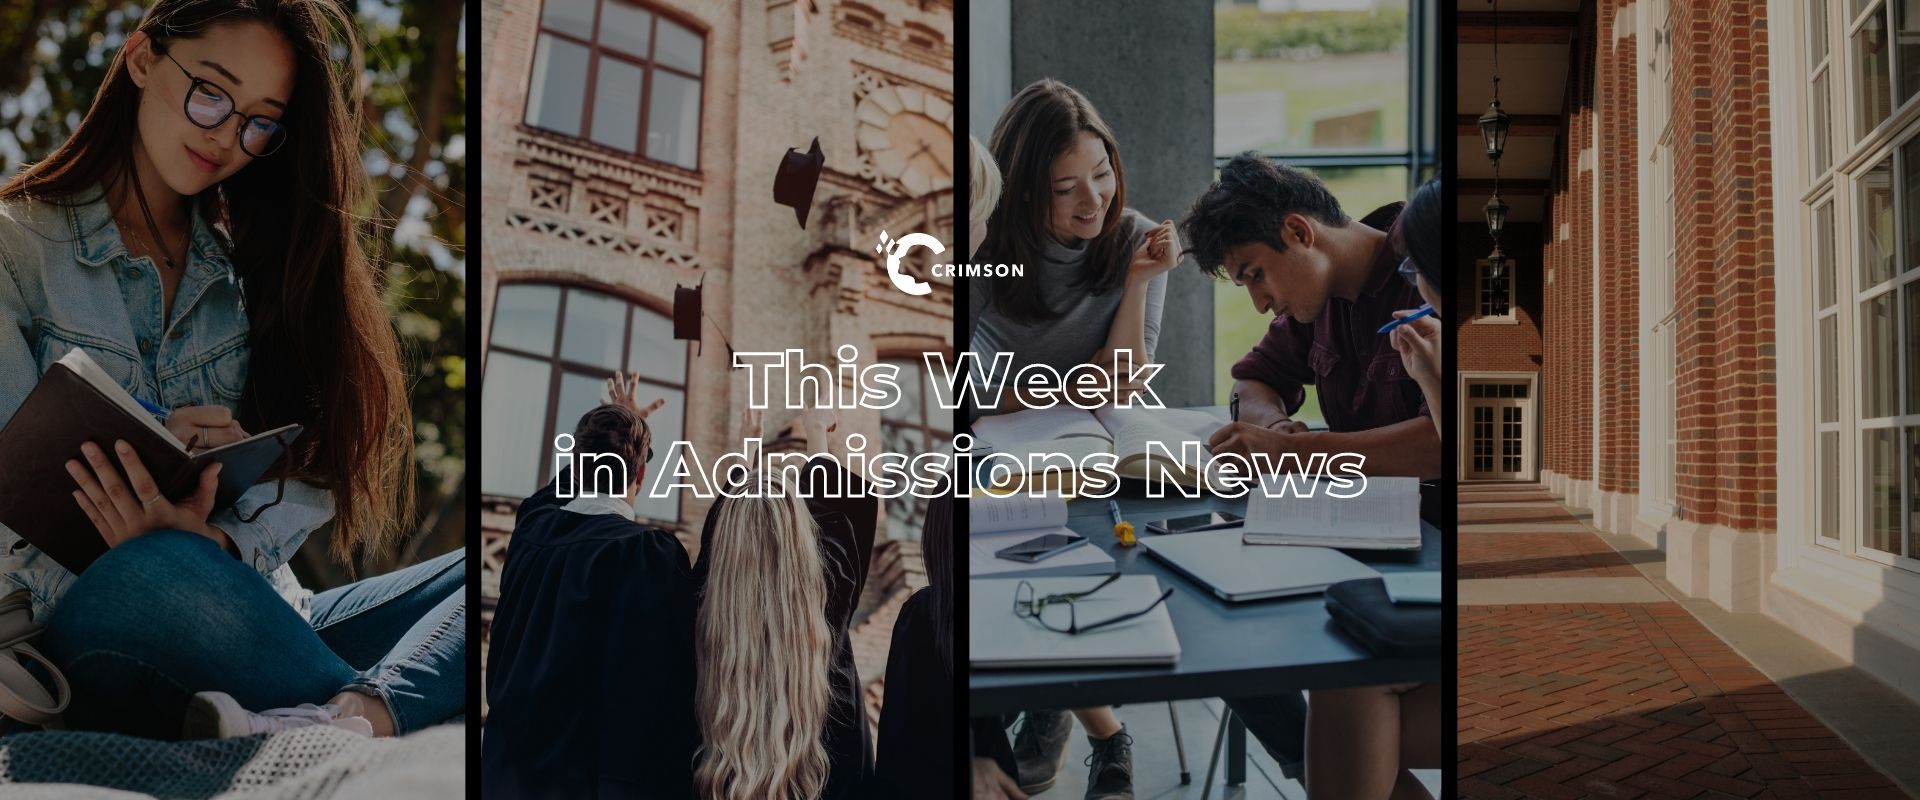 US News changes ranking methodology | This Week in Admissions News